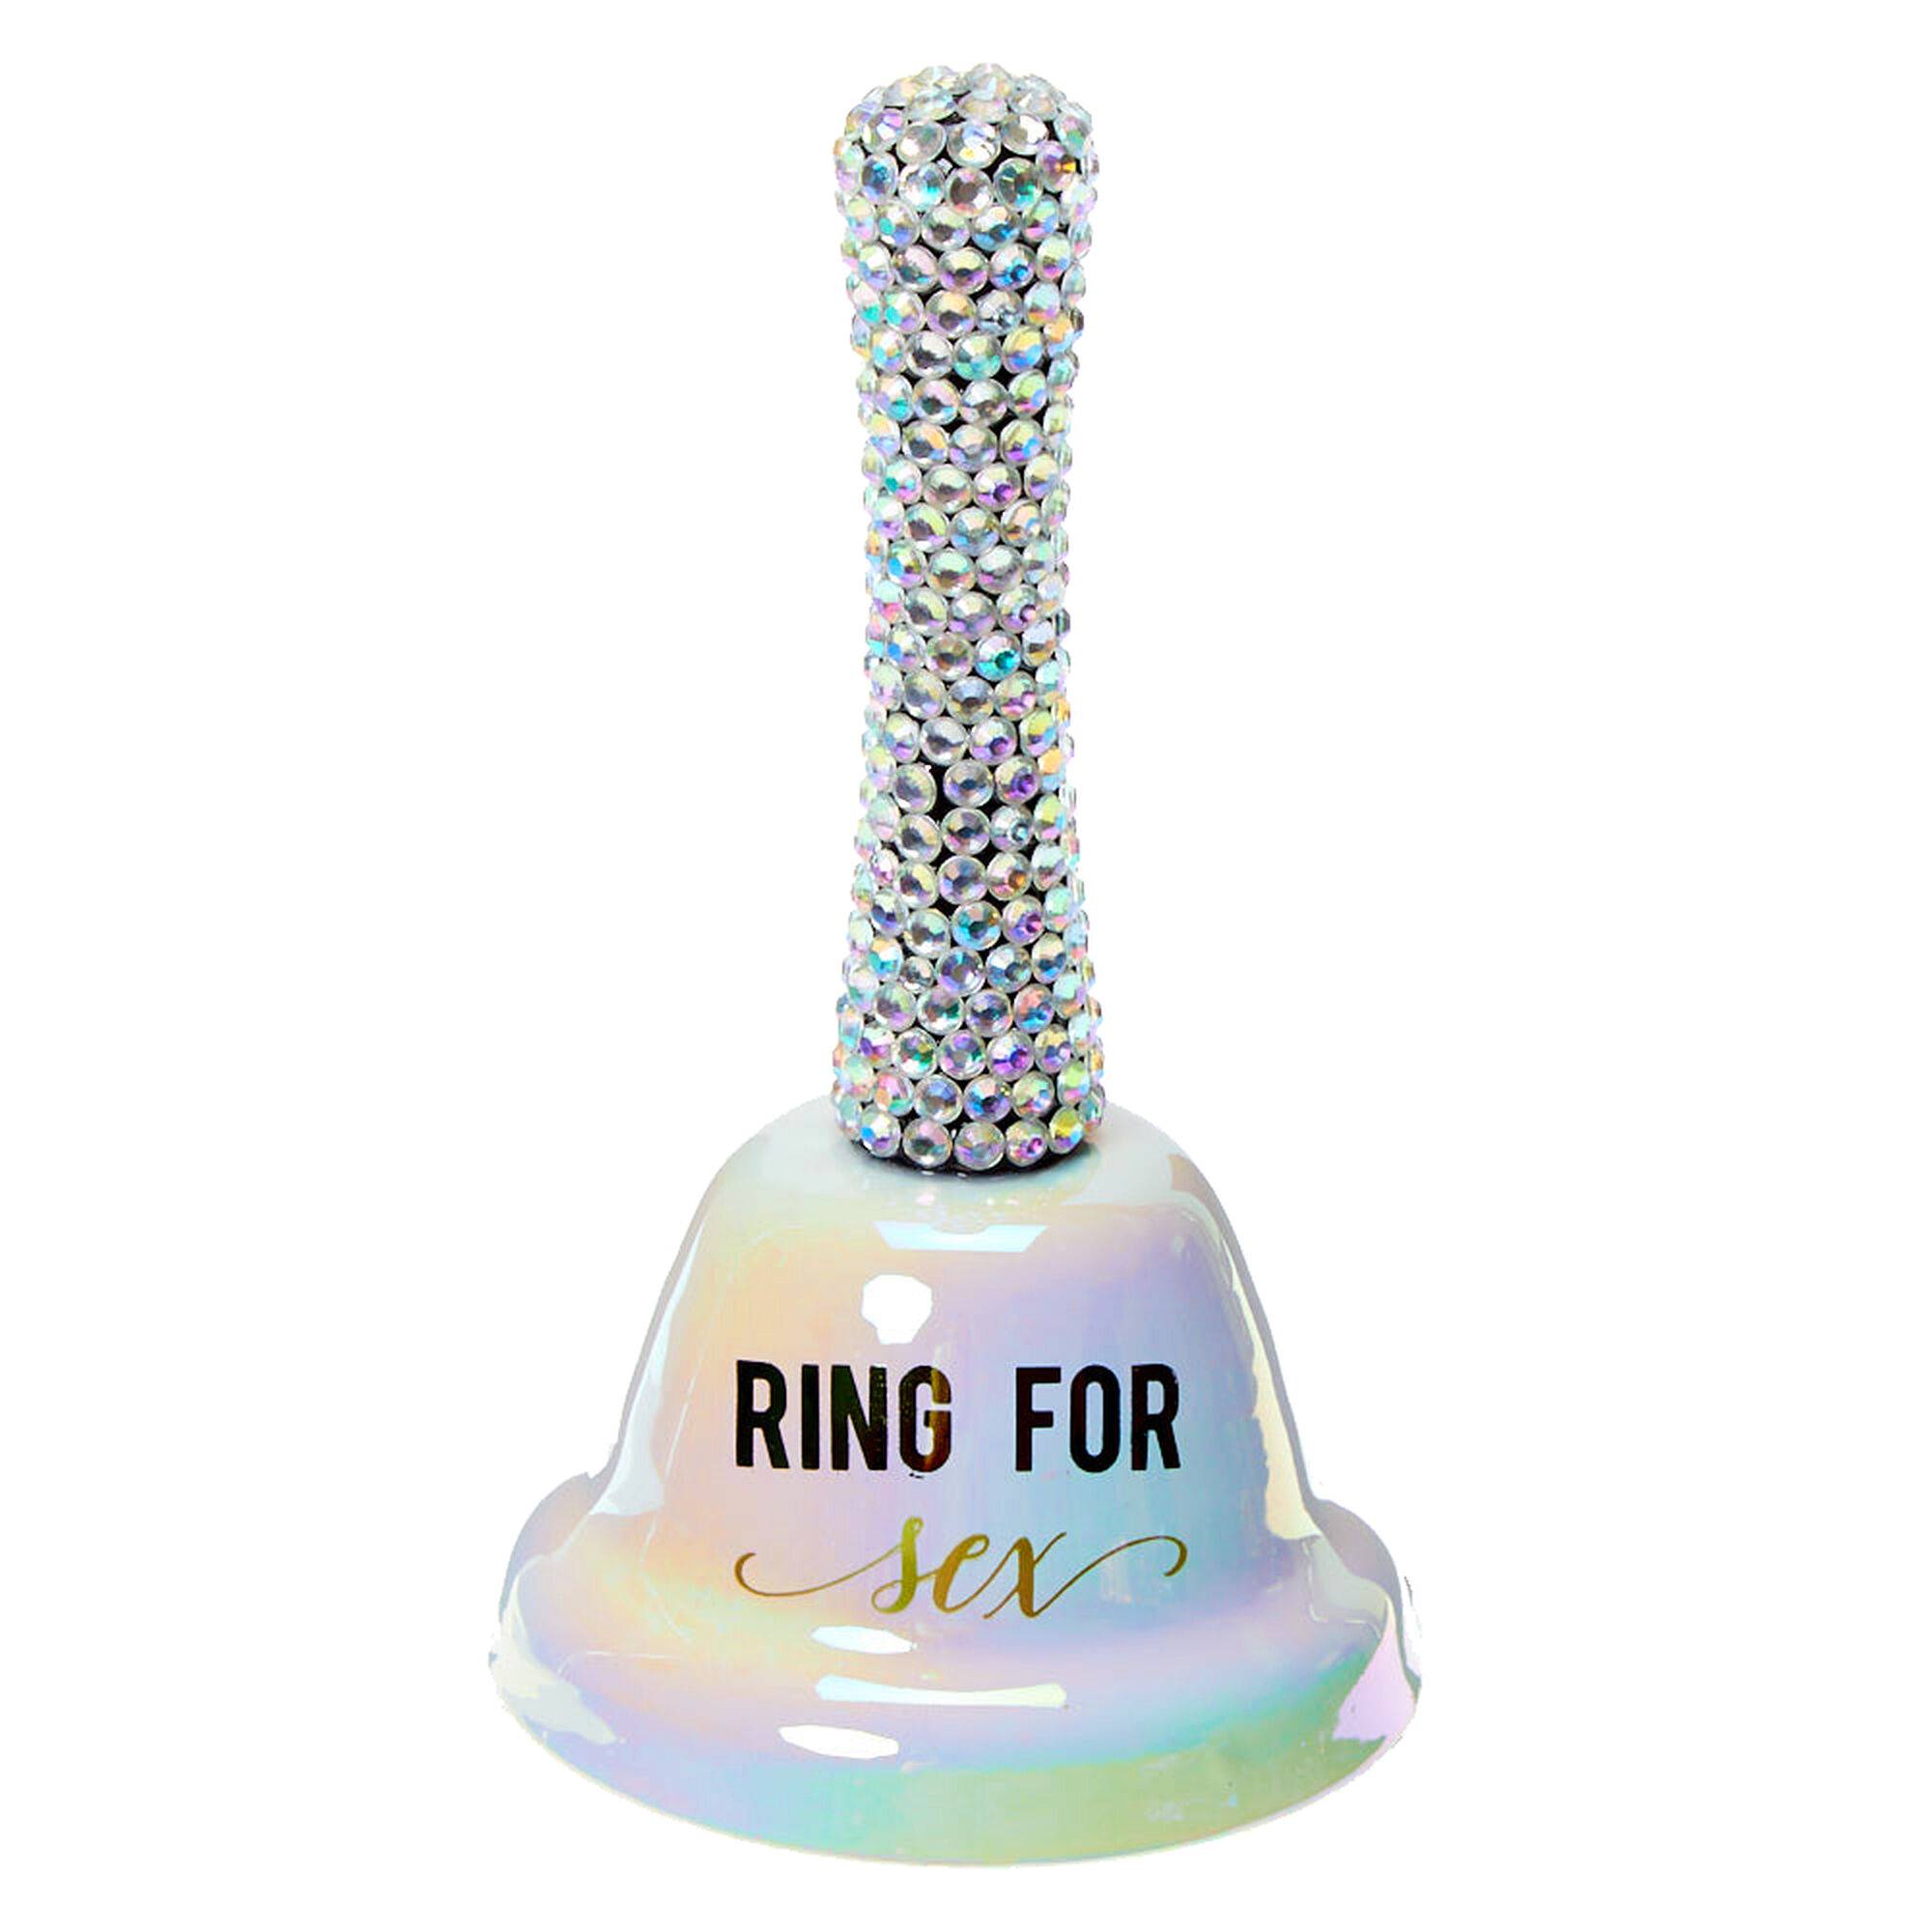 Del Norte Imposible Materialismo Ring For Sex Bell | Icing US